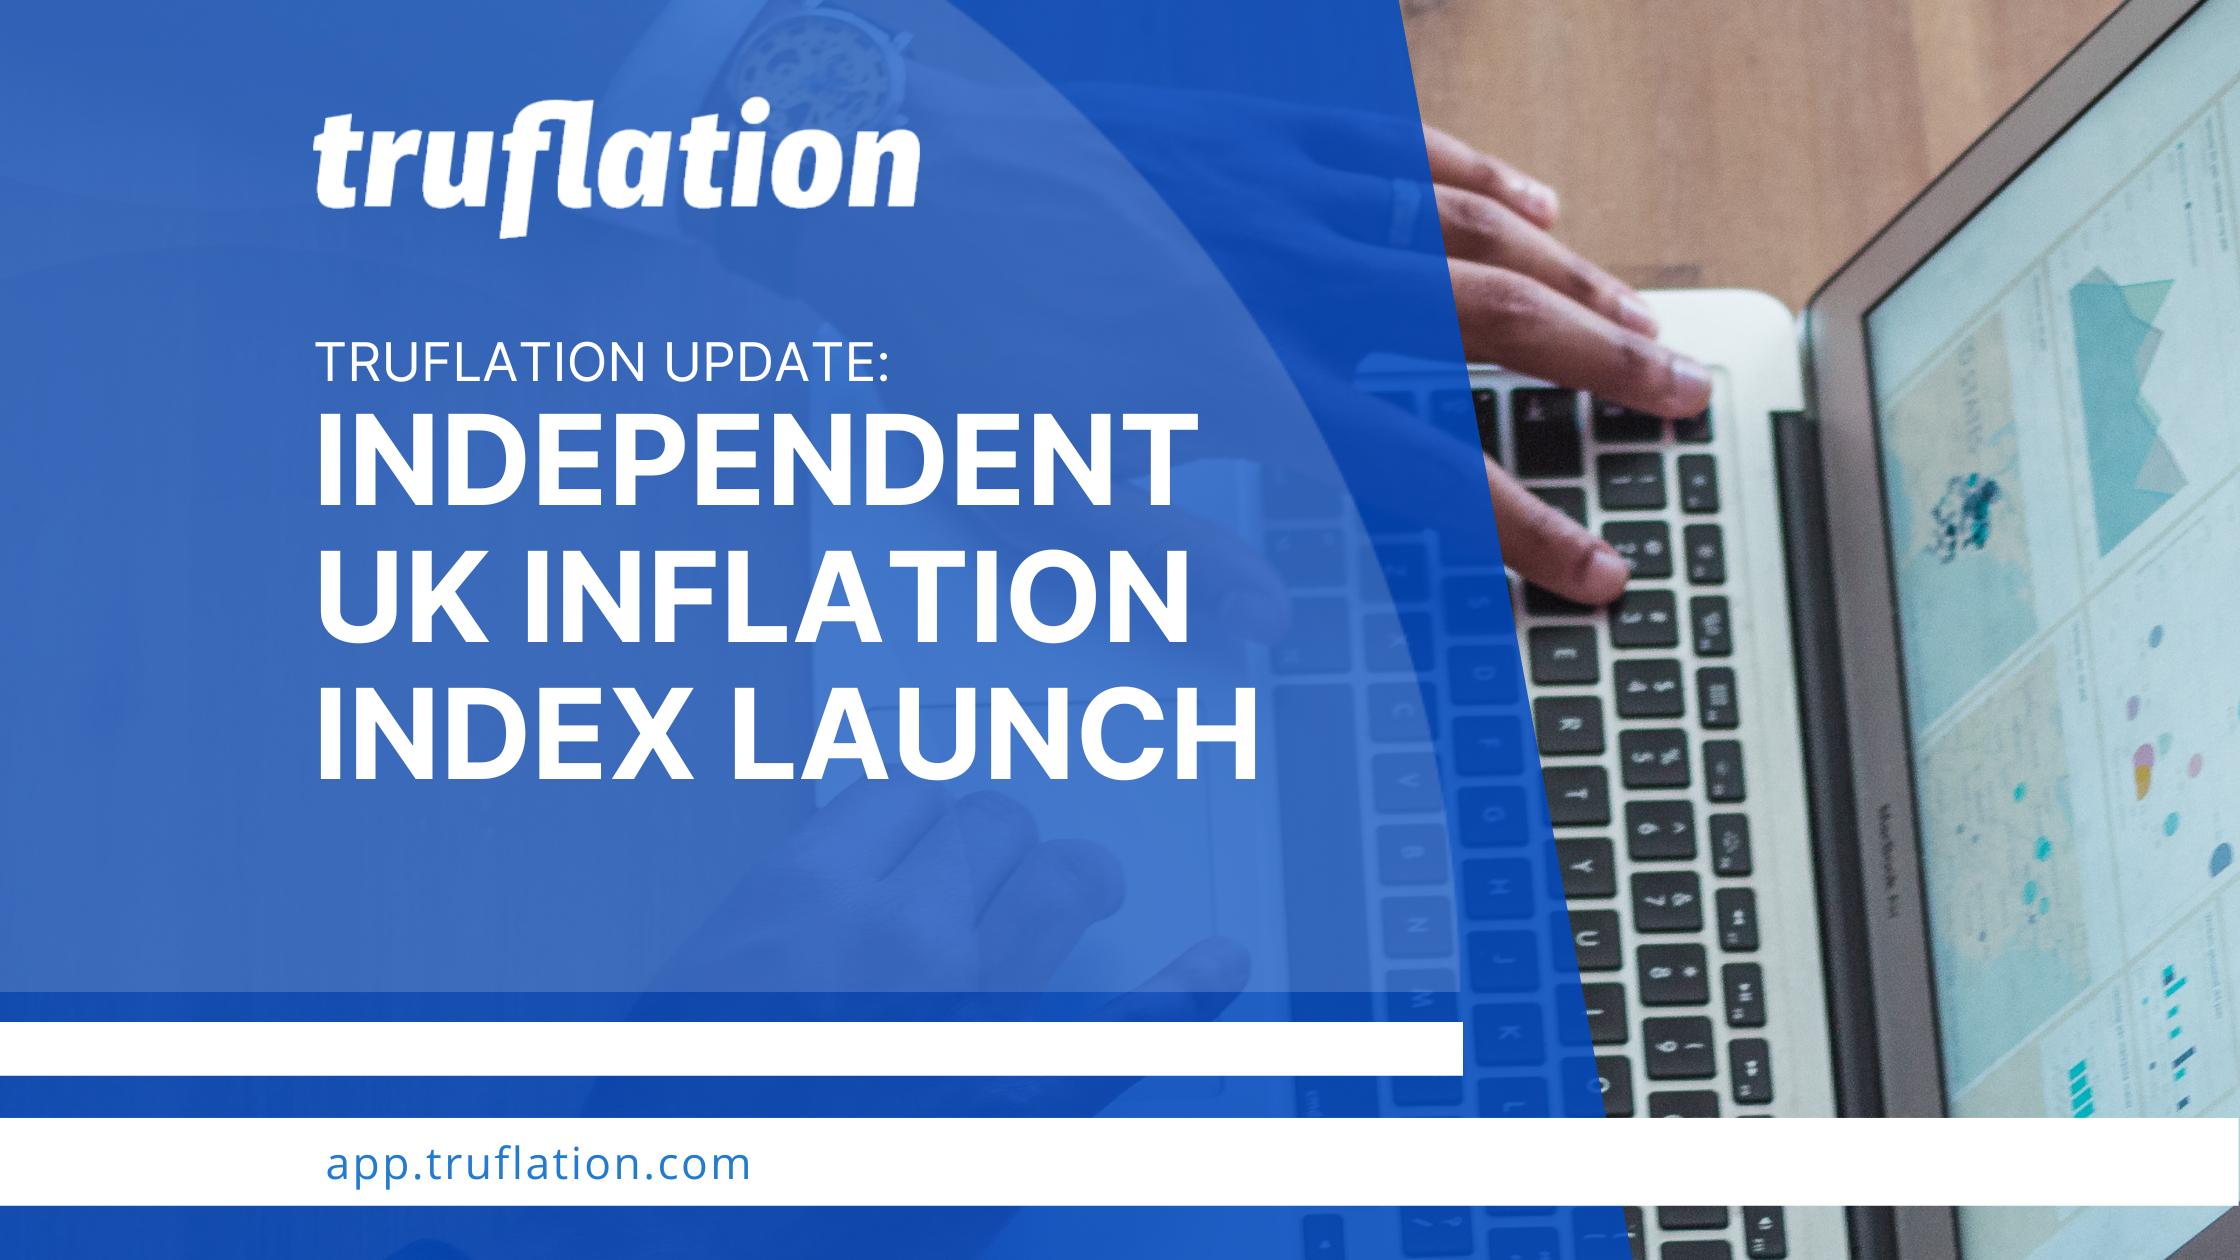 Truflation Launches Independent UK Inflation Index